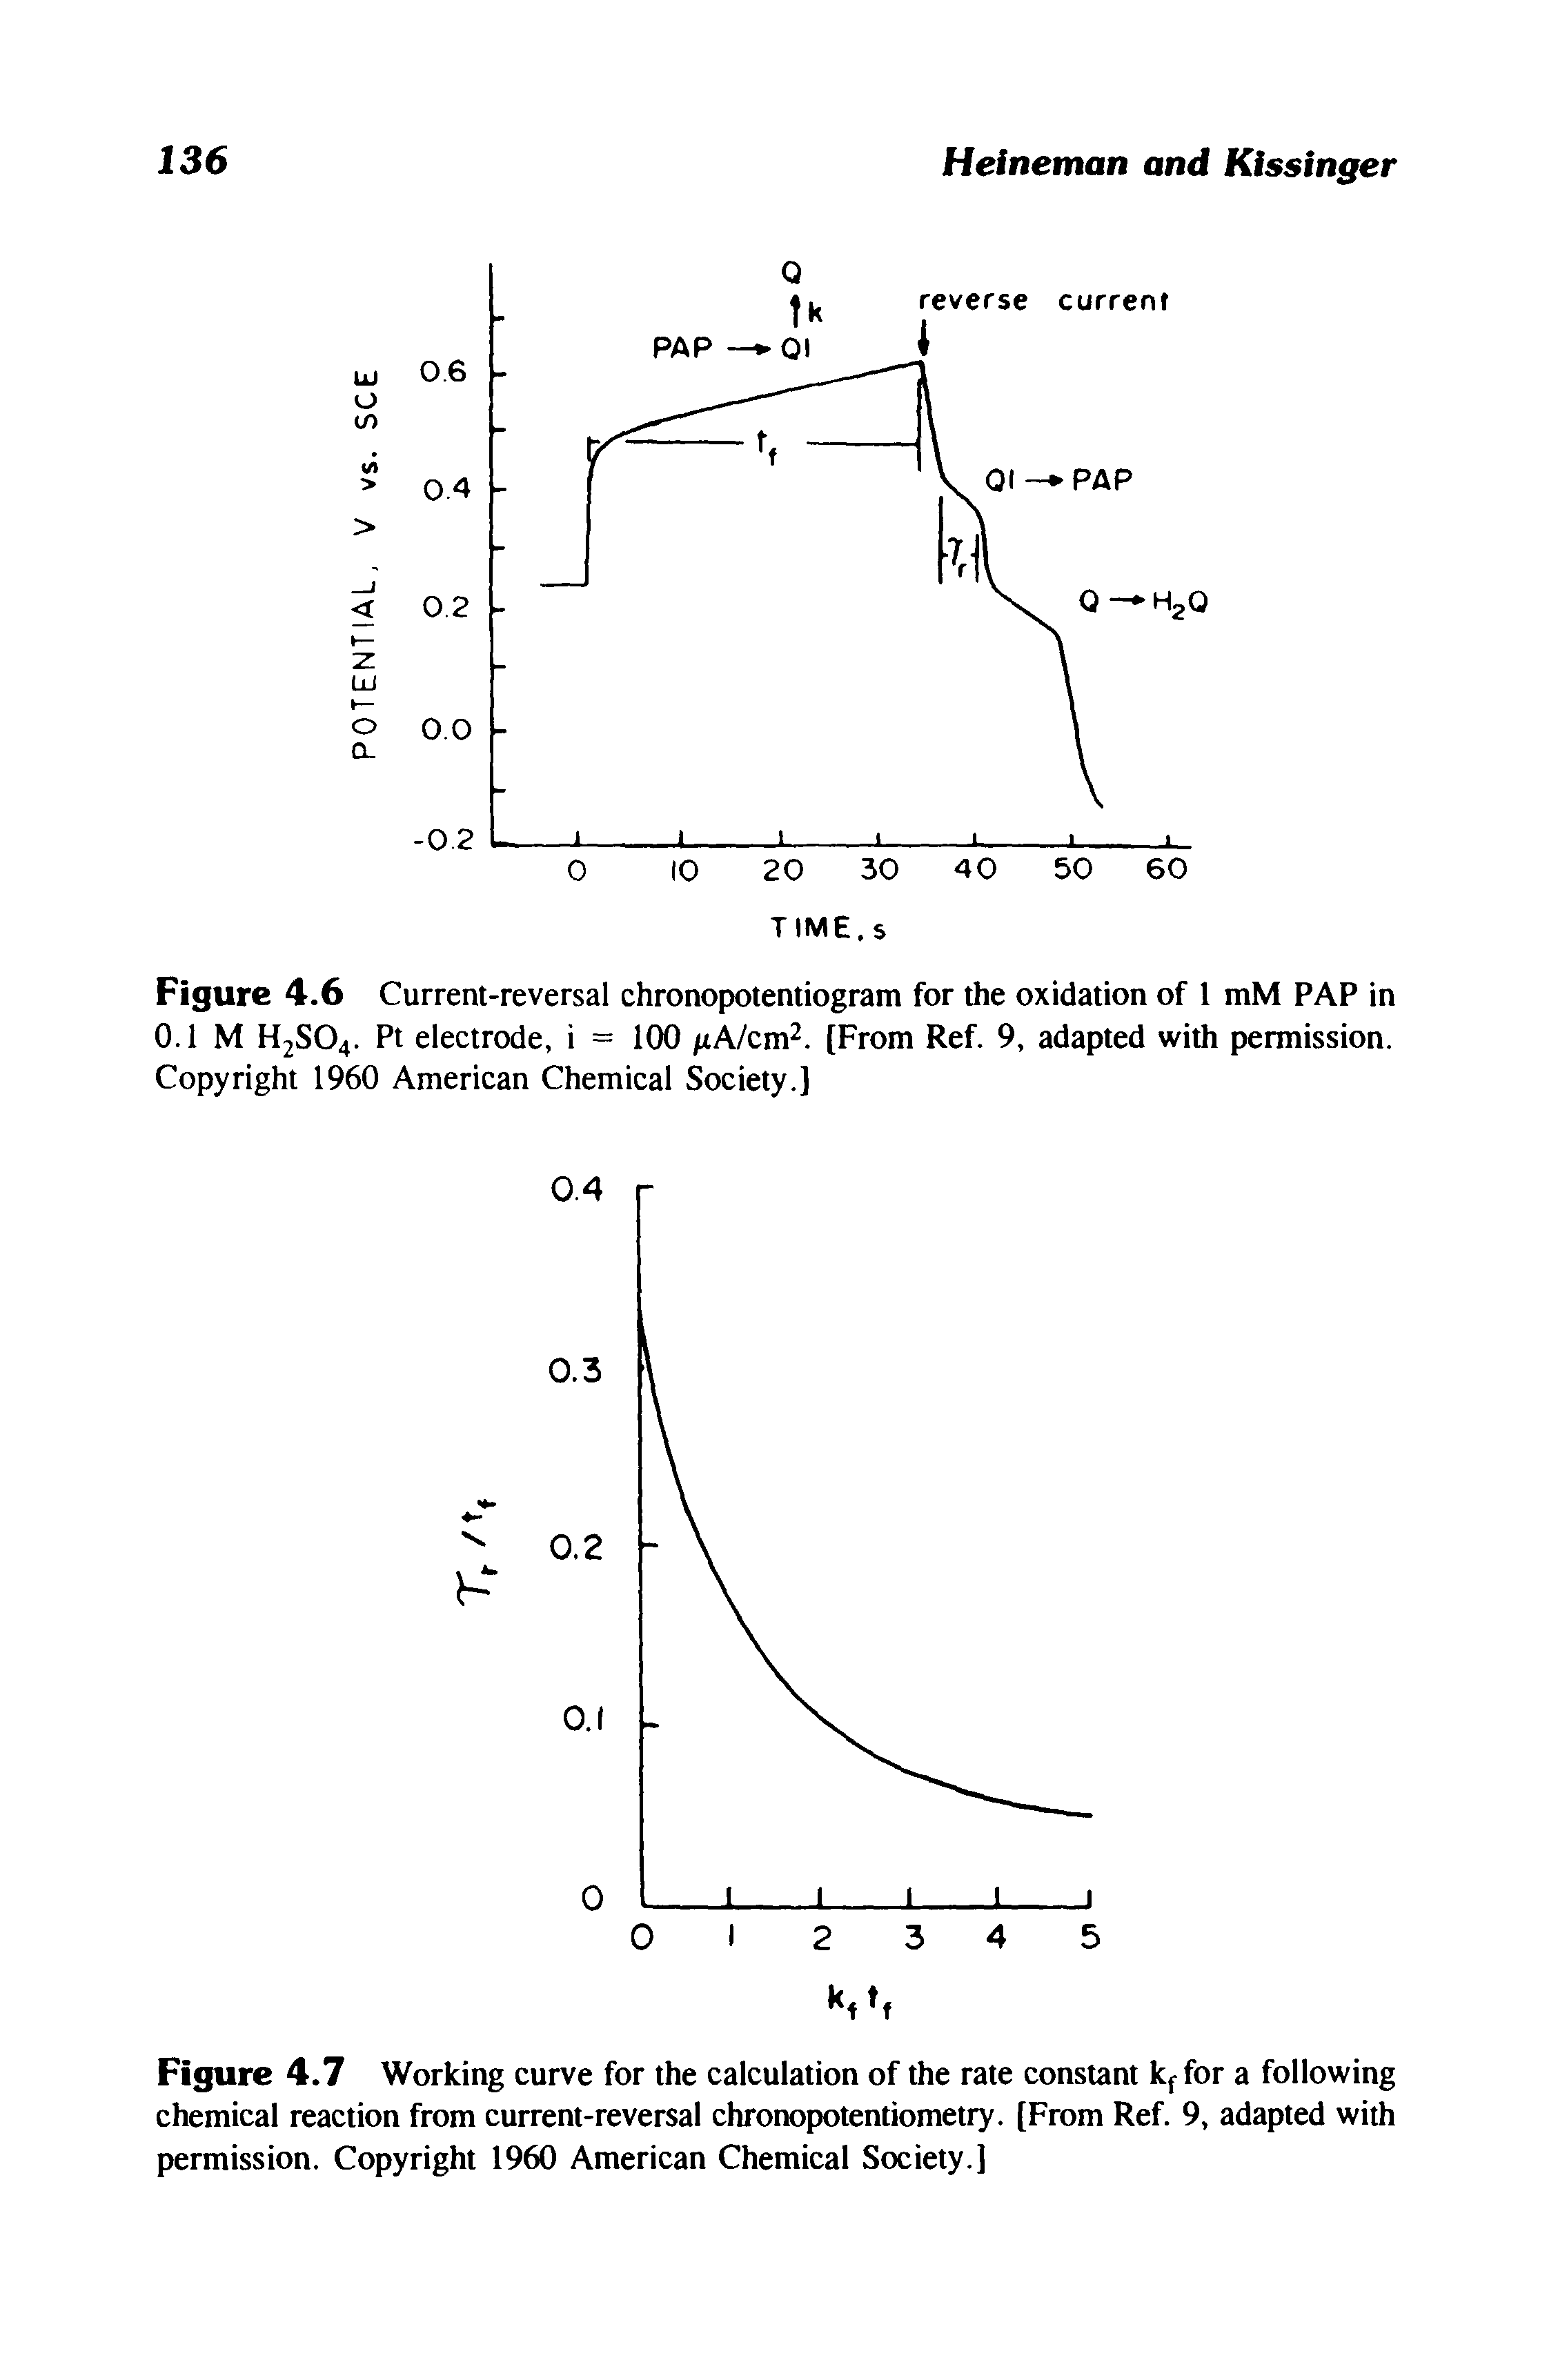 Figure 4.7 Working curve for the calculation of the rate constant kf for a following chemical reaction from current-reversal chronopotentiometry. [From Ref. 9, adapted with permission. Copyright 1960 American Chemical Society.]...